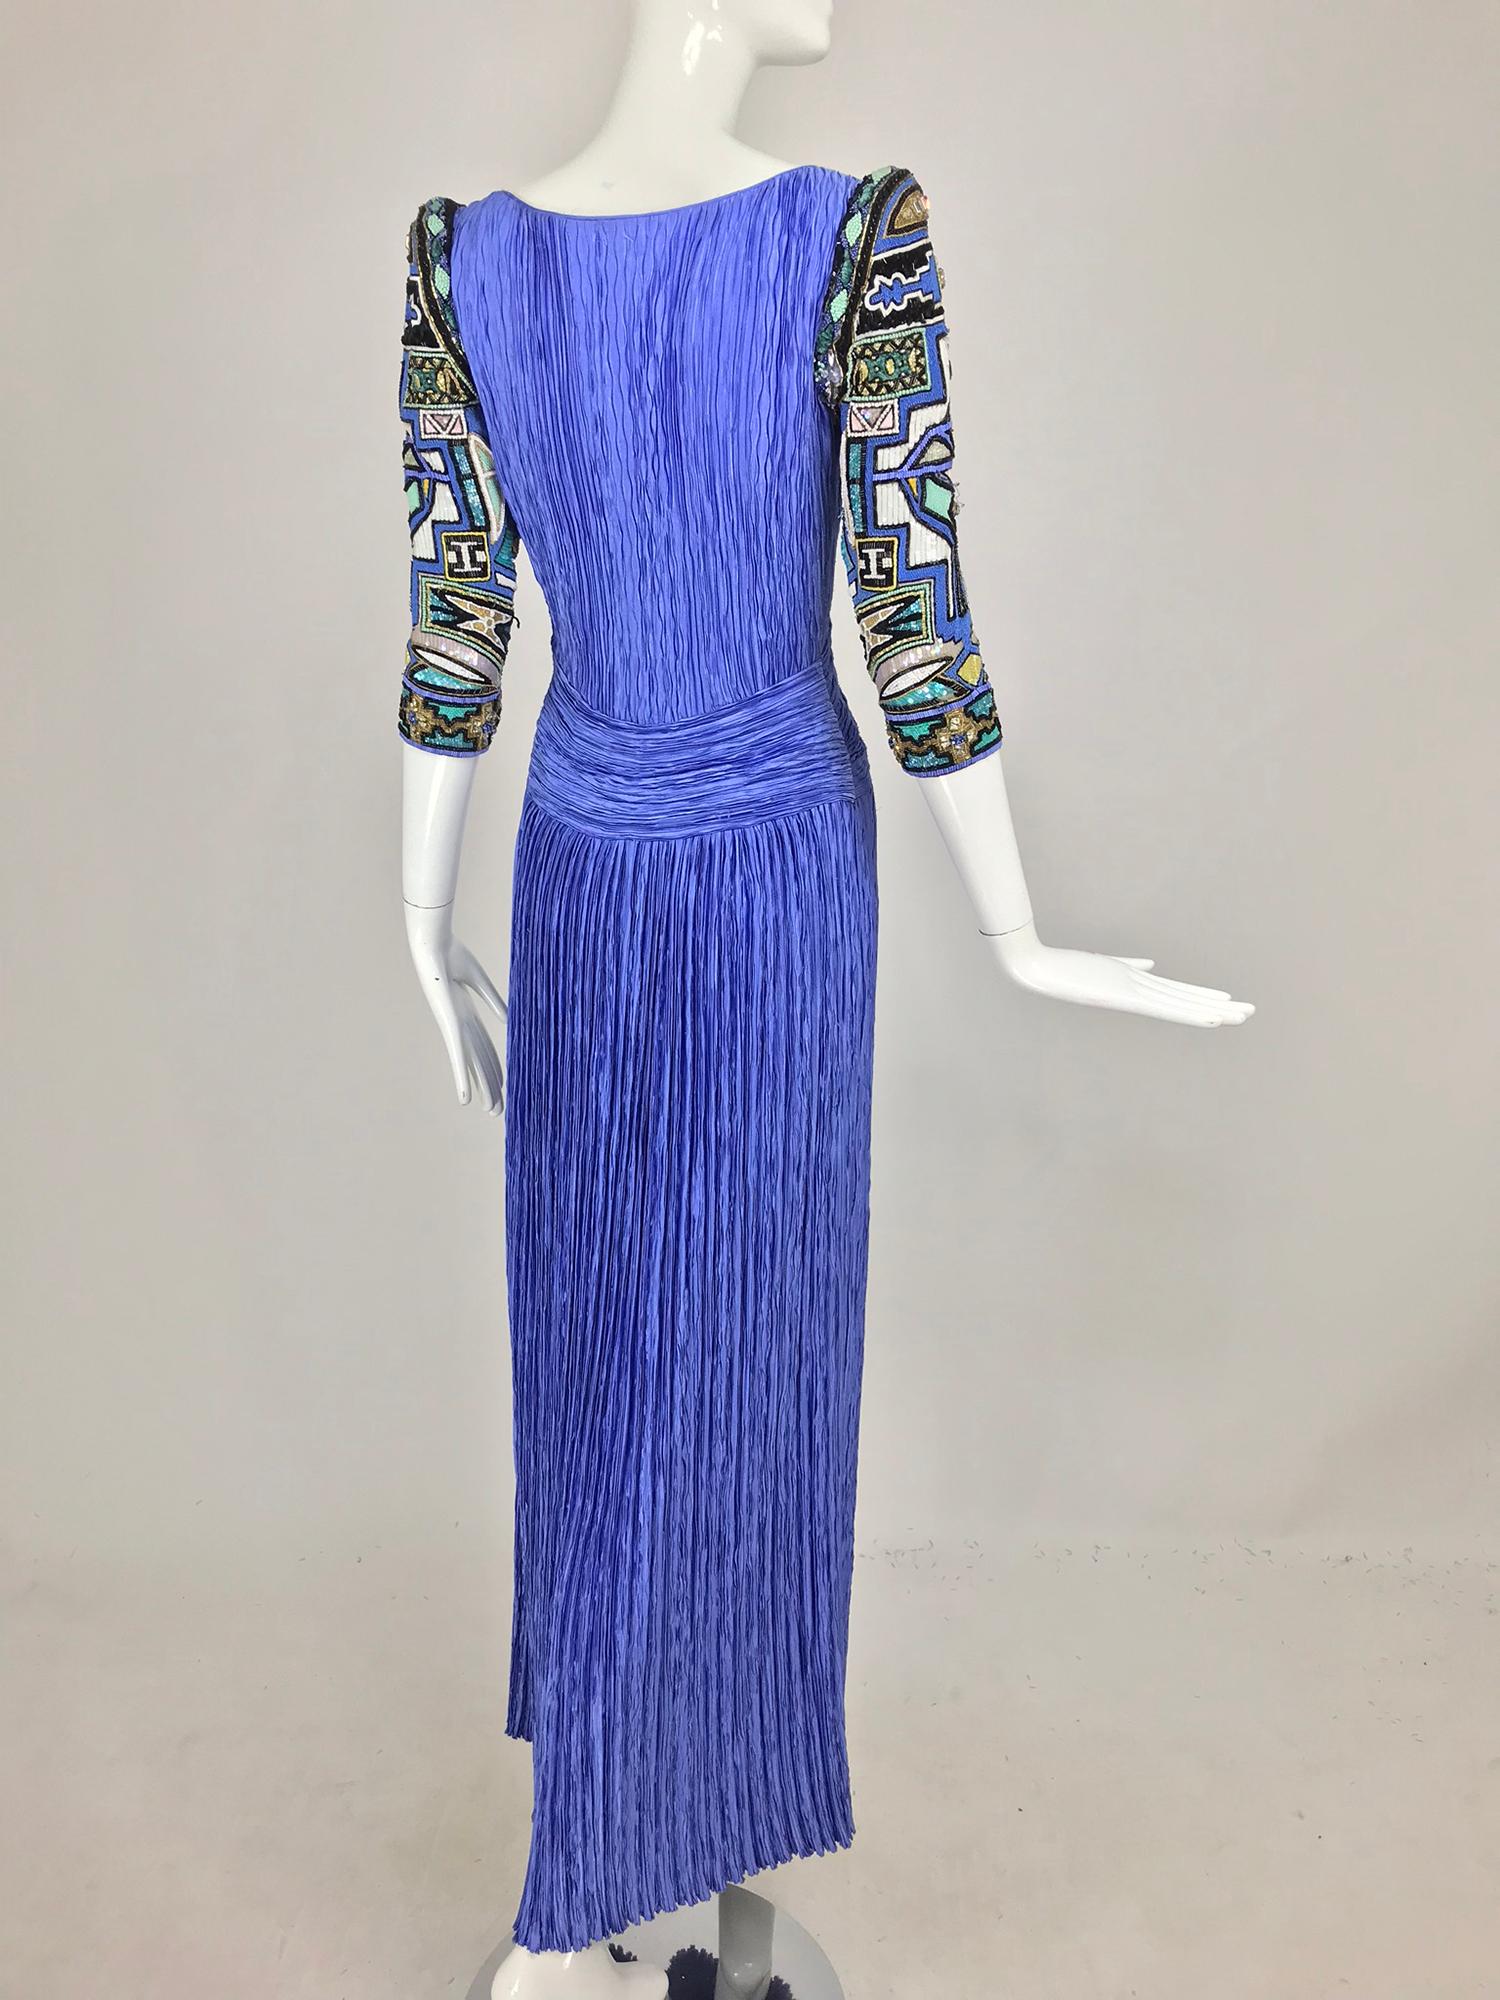 Mary McFadden Couture Art Beaded Pleated Evening Gown in Blue 1980s 1